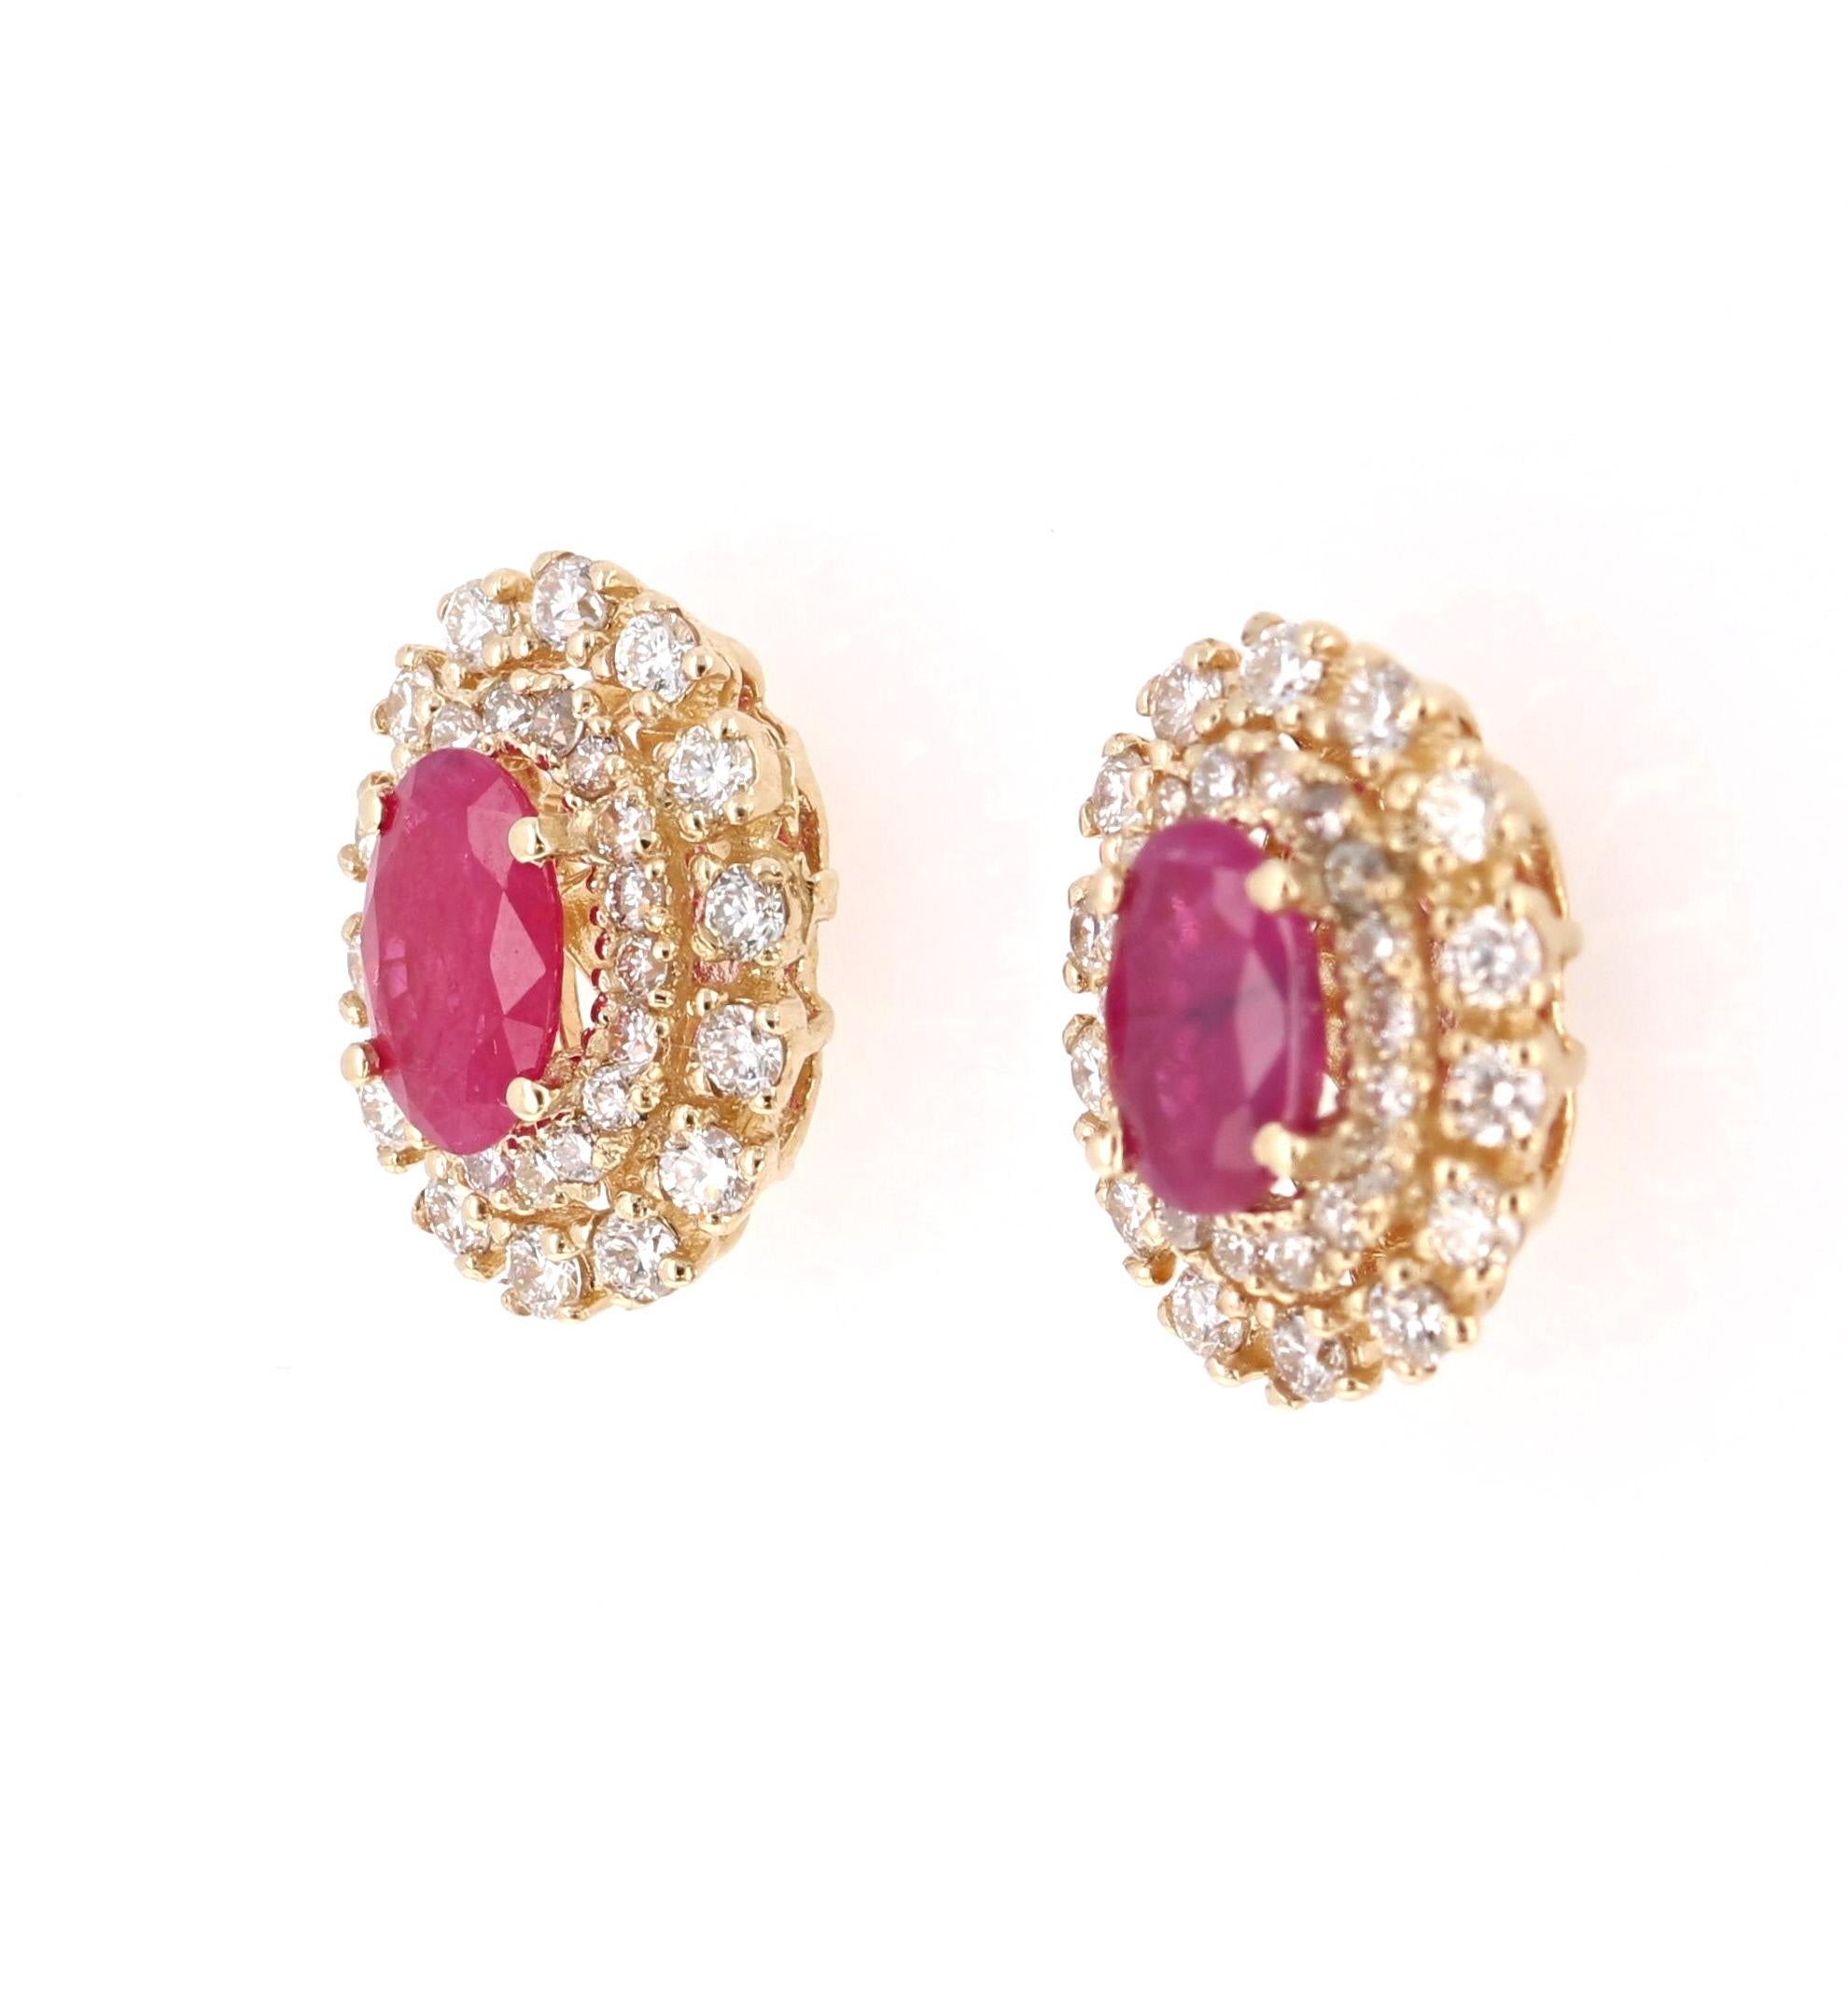 These absolute beauties have 2 Natural Rubies that weigh 1.26 Carats and are surrounded by 64 Round Cut Diamonds that weigh 0.65 Carats. (Clarity: VS, Color: H)

They are made in 14 Karat Yellow Gold and weigh approximately 2.3 grams. The setting of